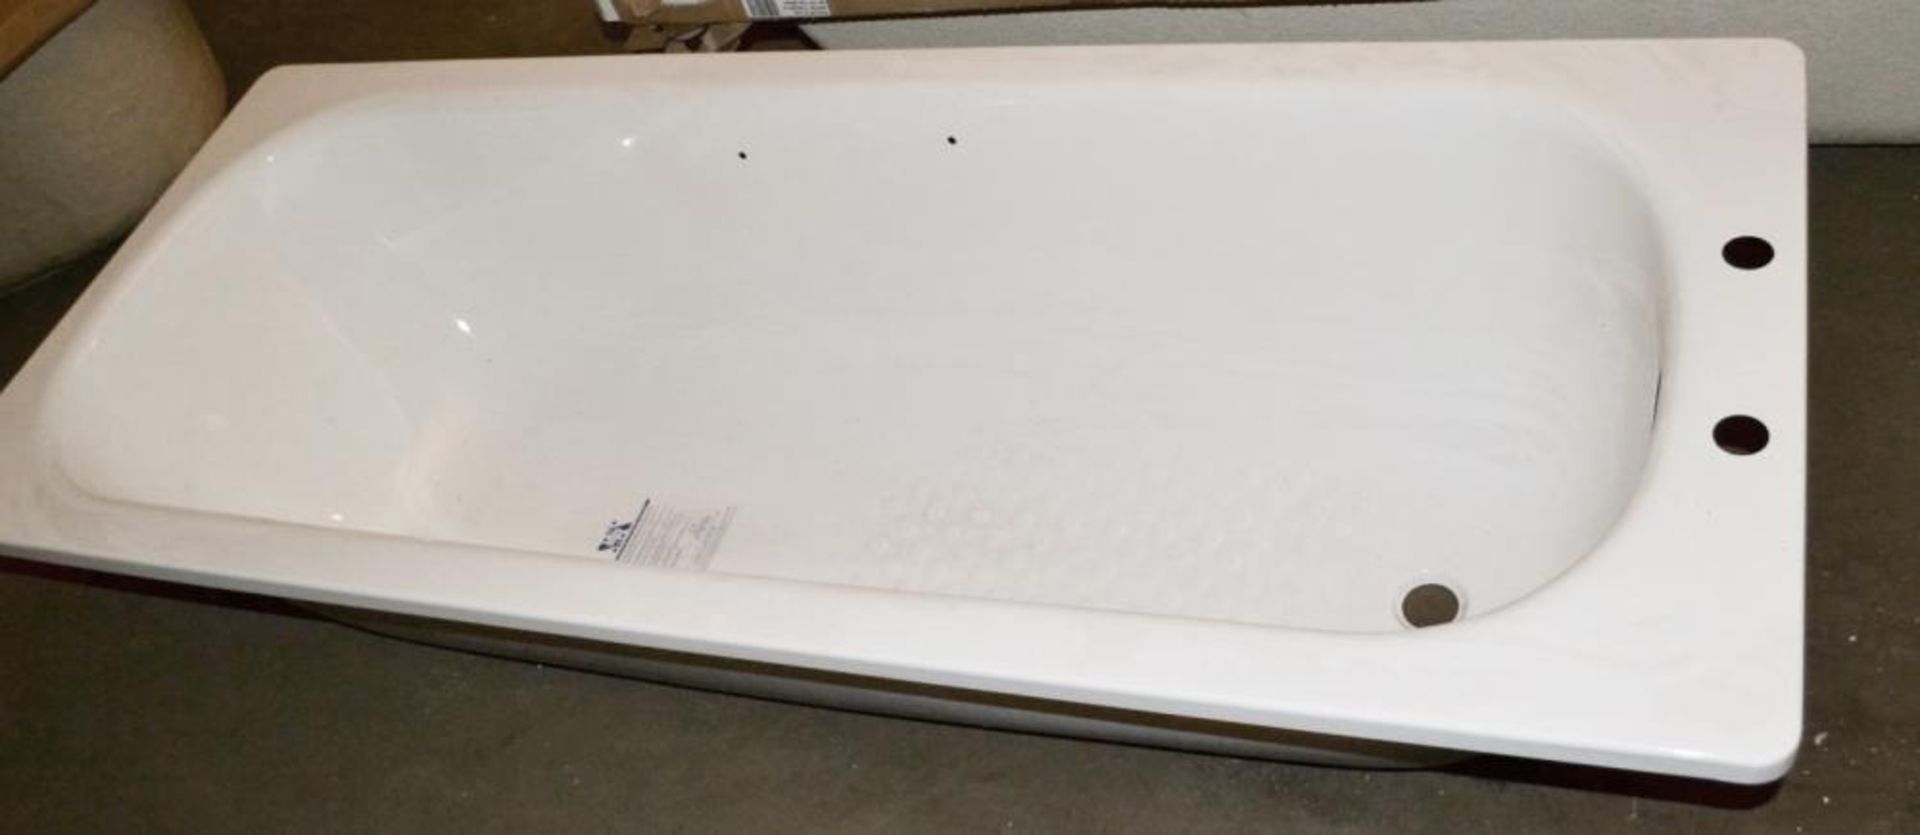 1 x Steel Bath With White Enamel Coating - Features 2 Tap Holes - Includes Box Of Fittings - New / U - Image 4 of 4